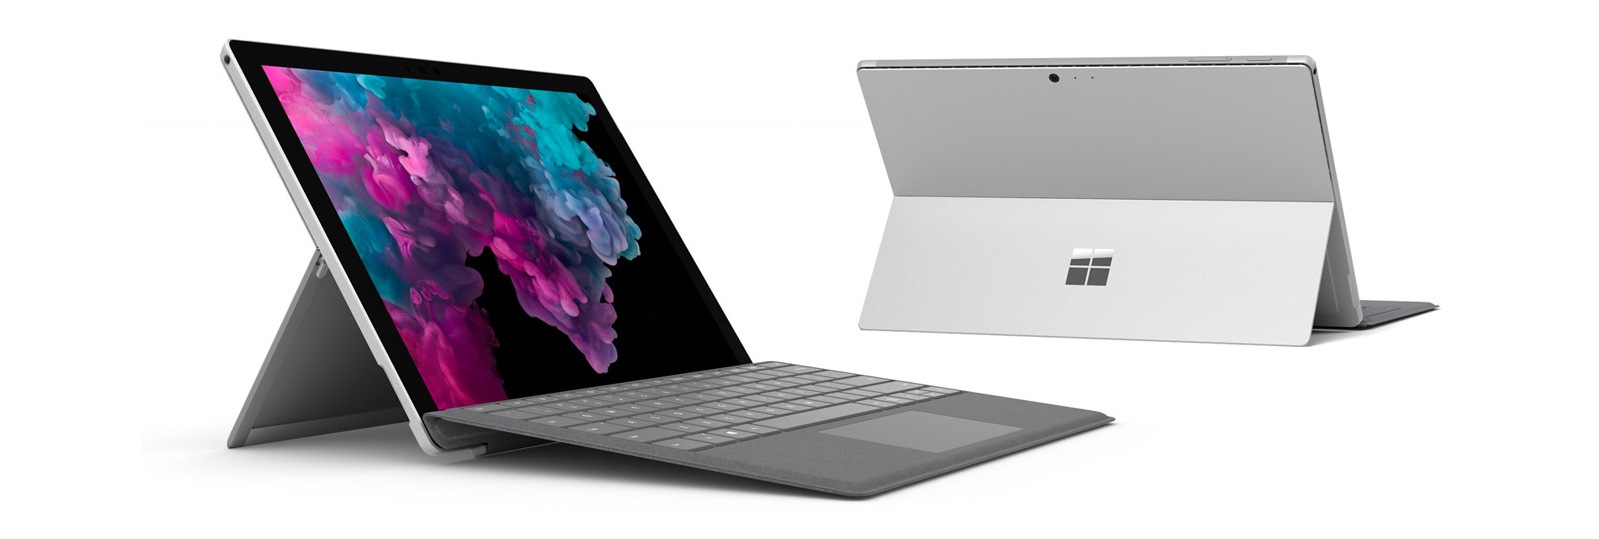 Surface Pro 6 seen from the front in laptop mode with Surface Pro Type Cover, and from behind with the Kickstand deployed